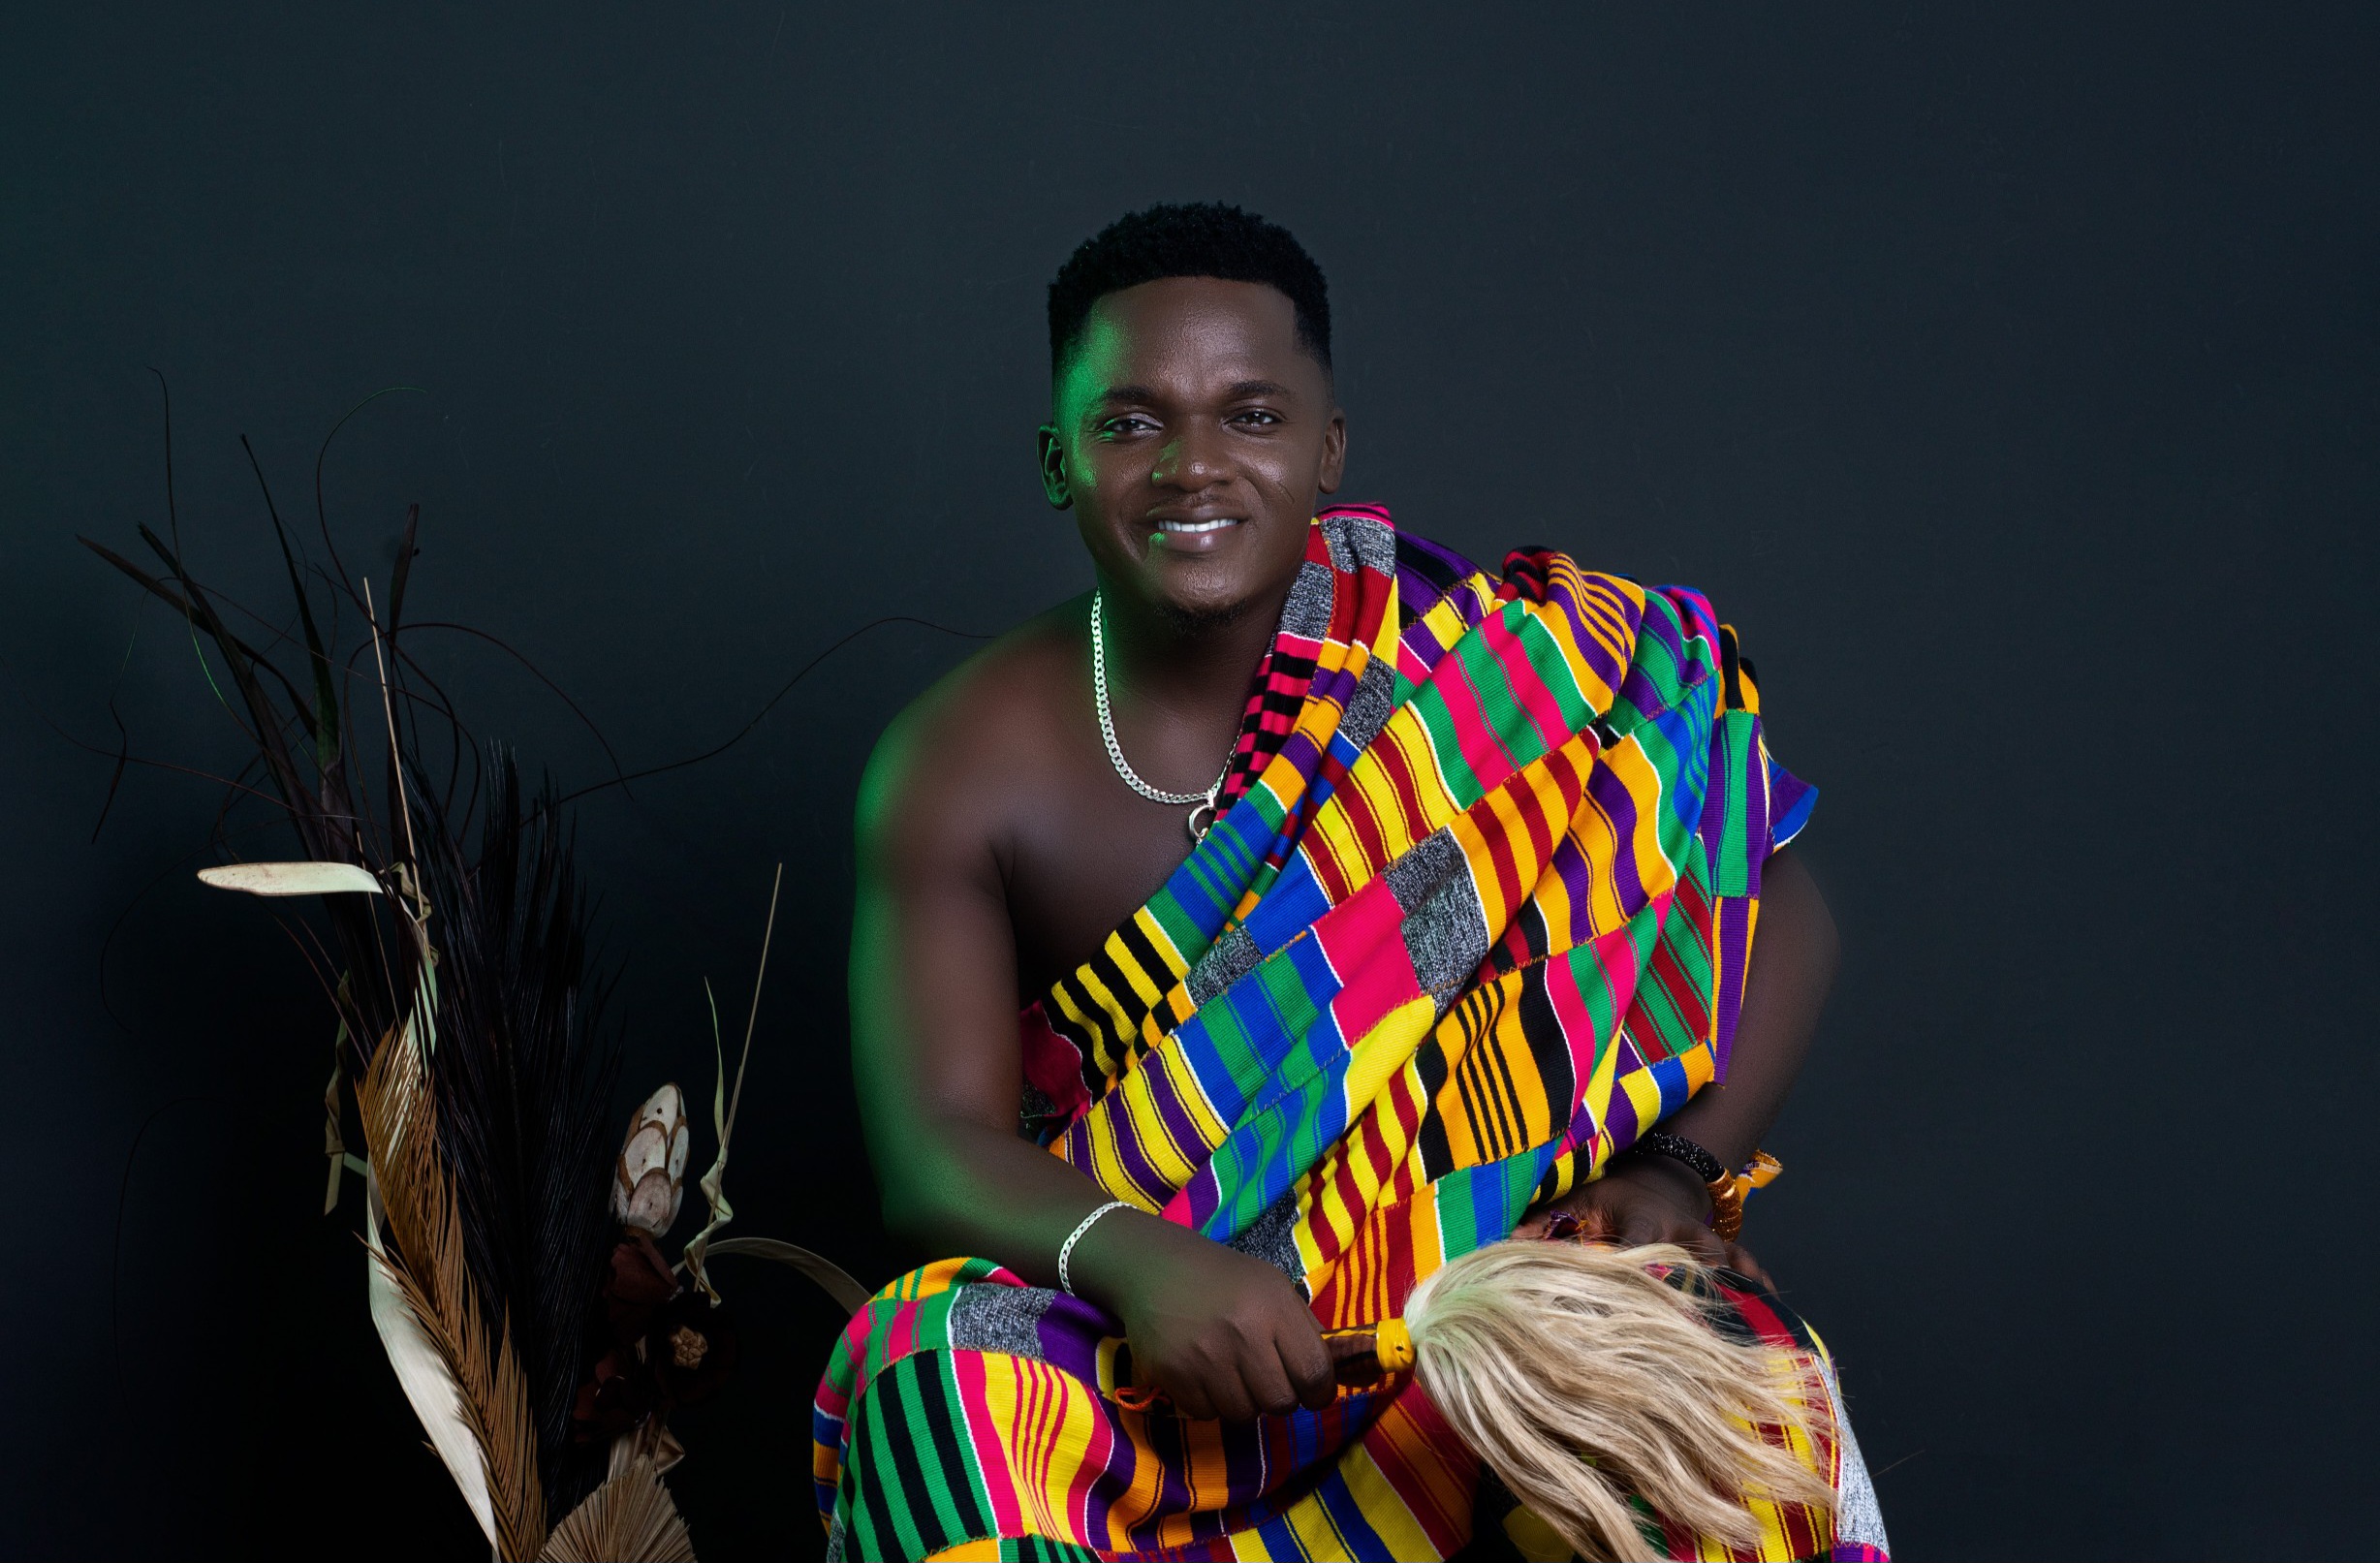 Phrimpong Captivates Fans With Pictures In Stunning Traditional Outfits.